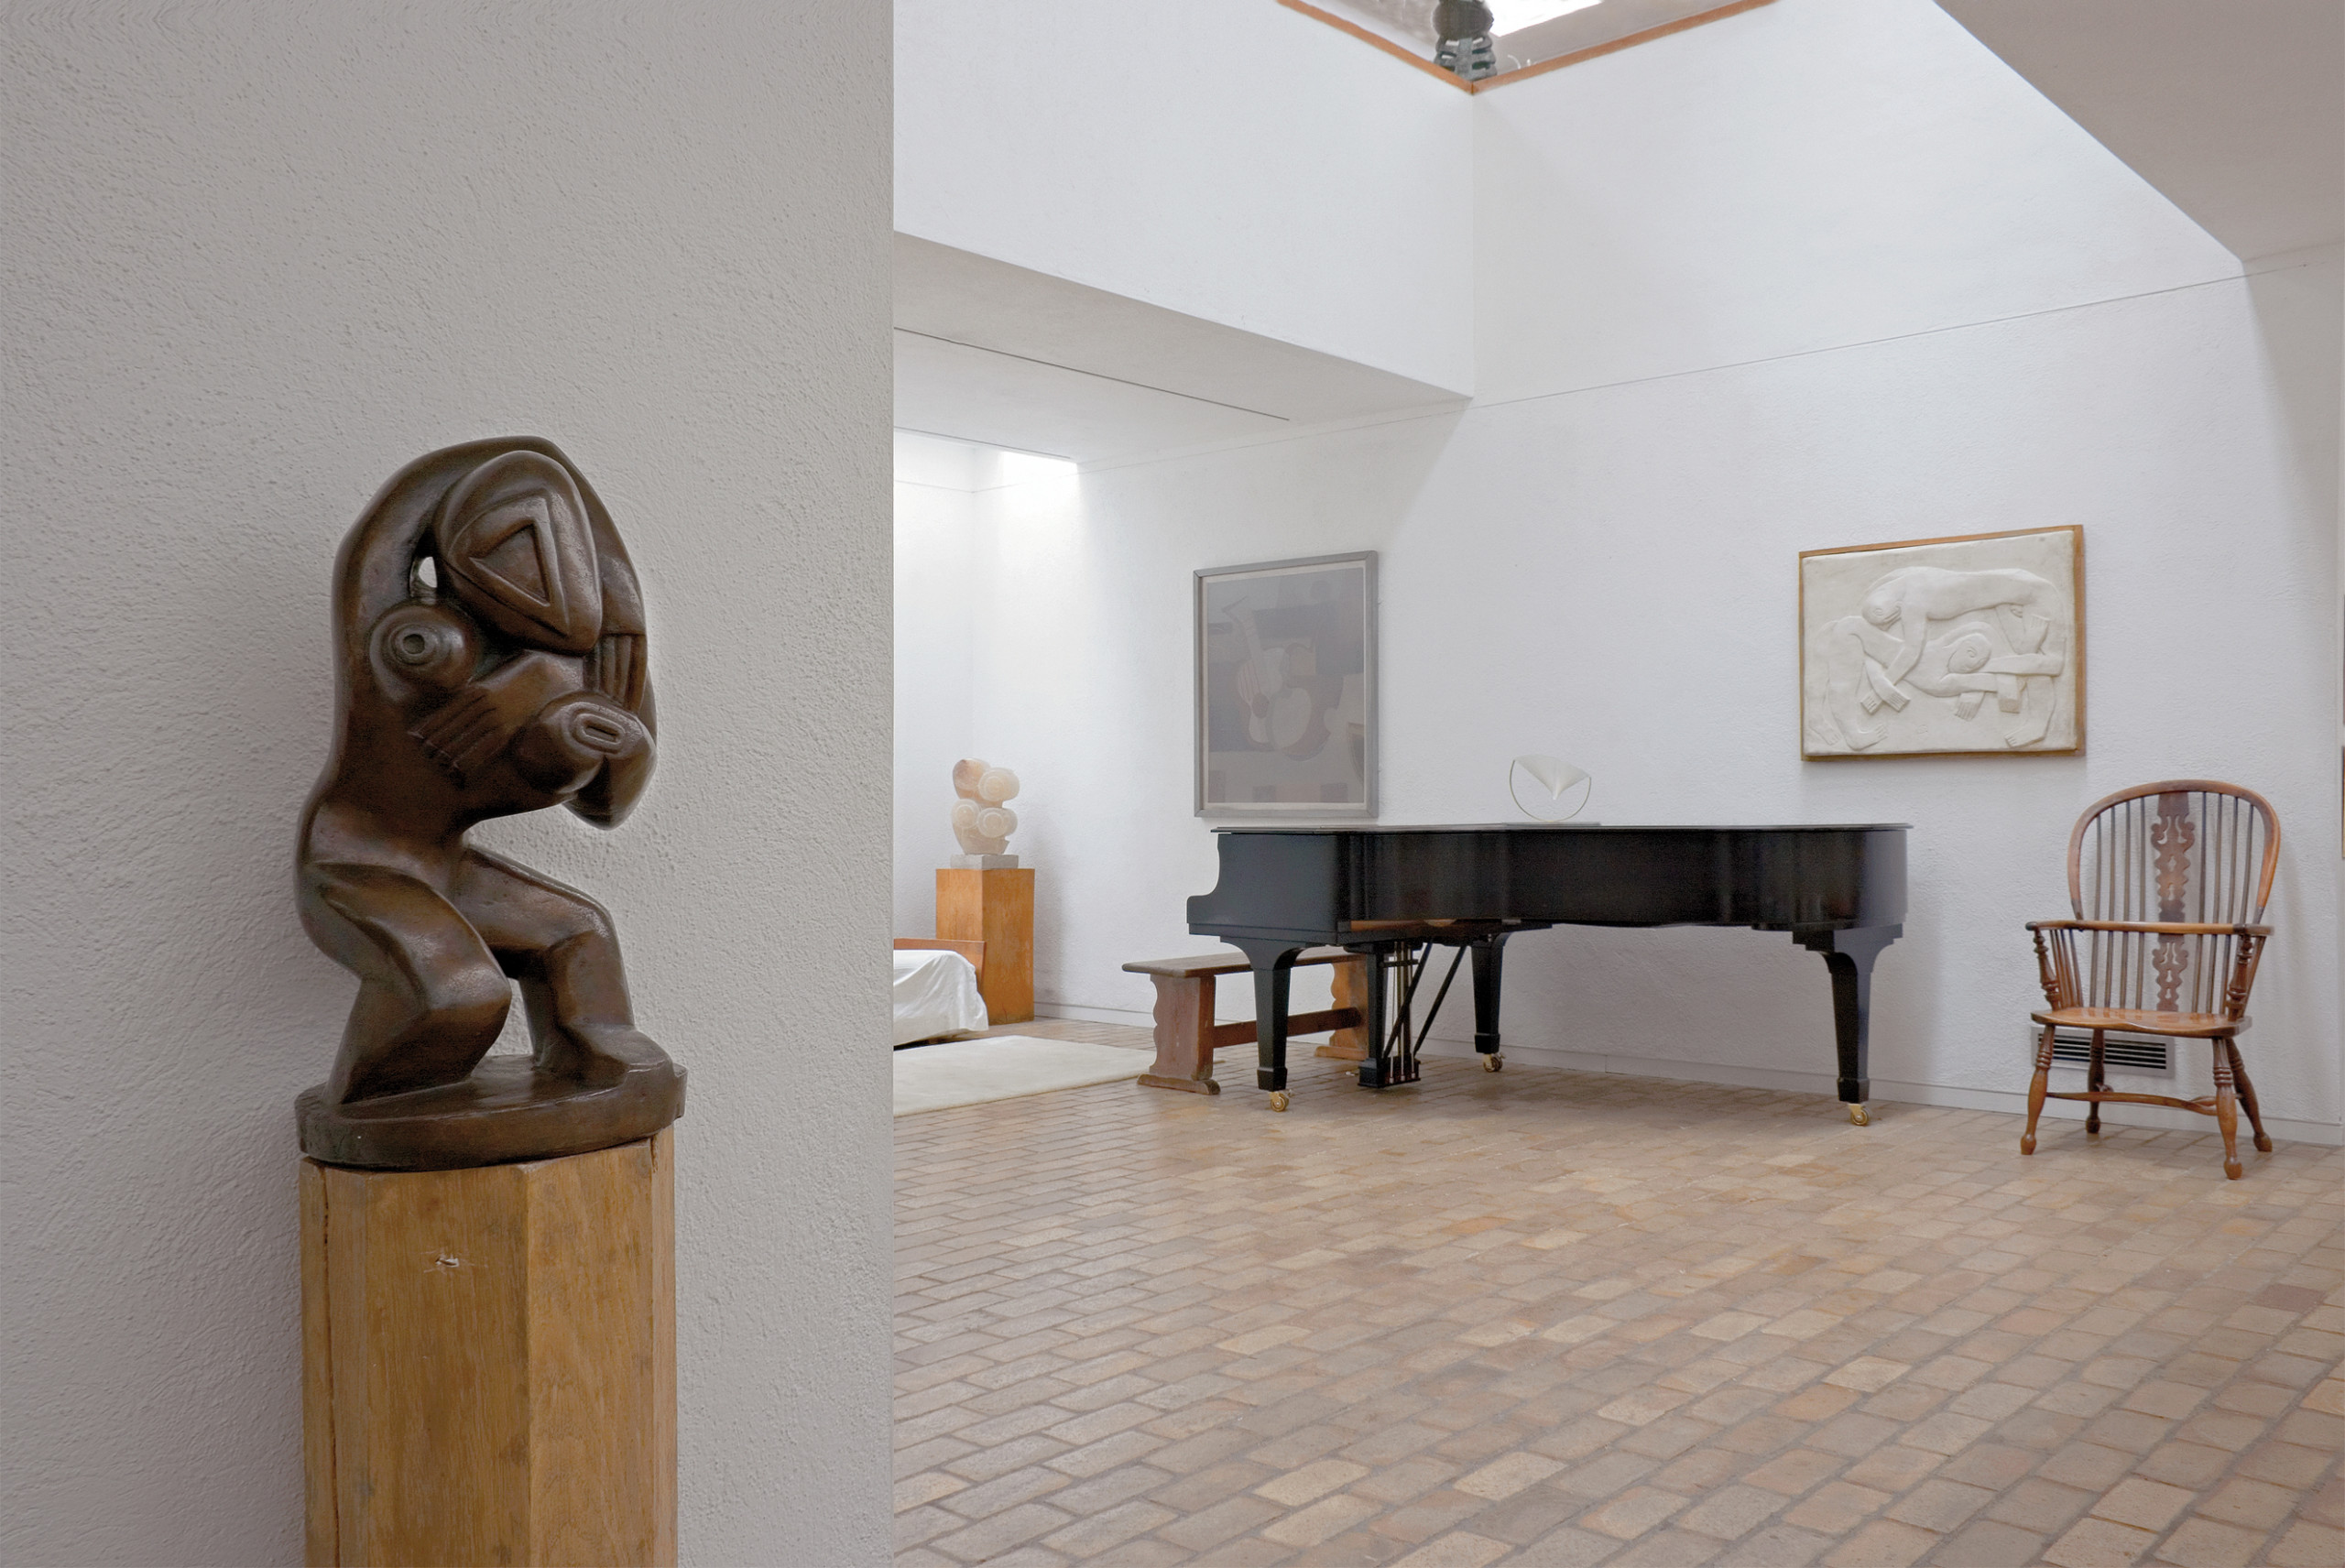 A sculpture and piano at the Kettle's Yard Gallery